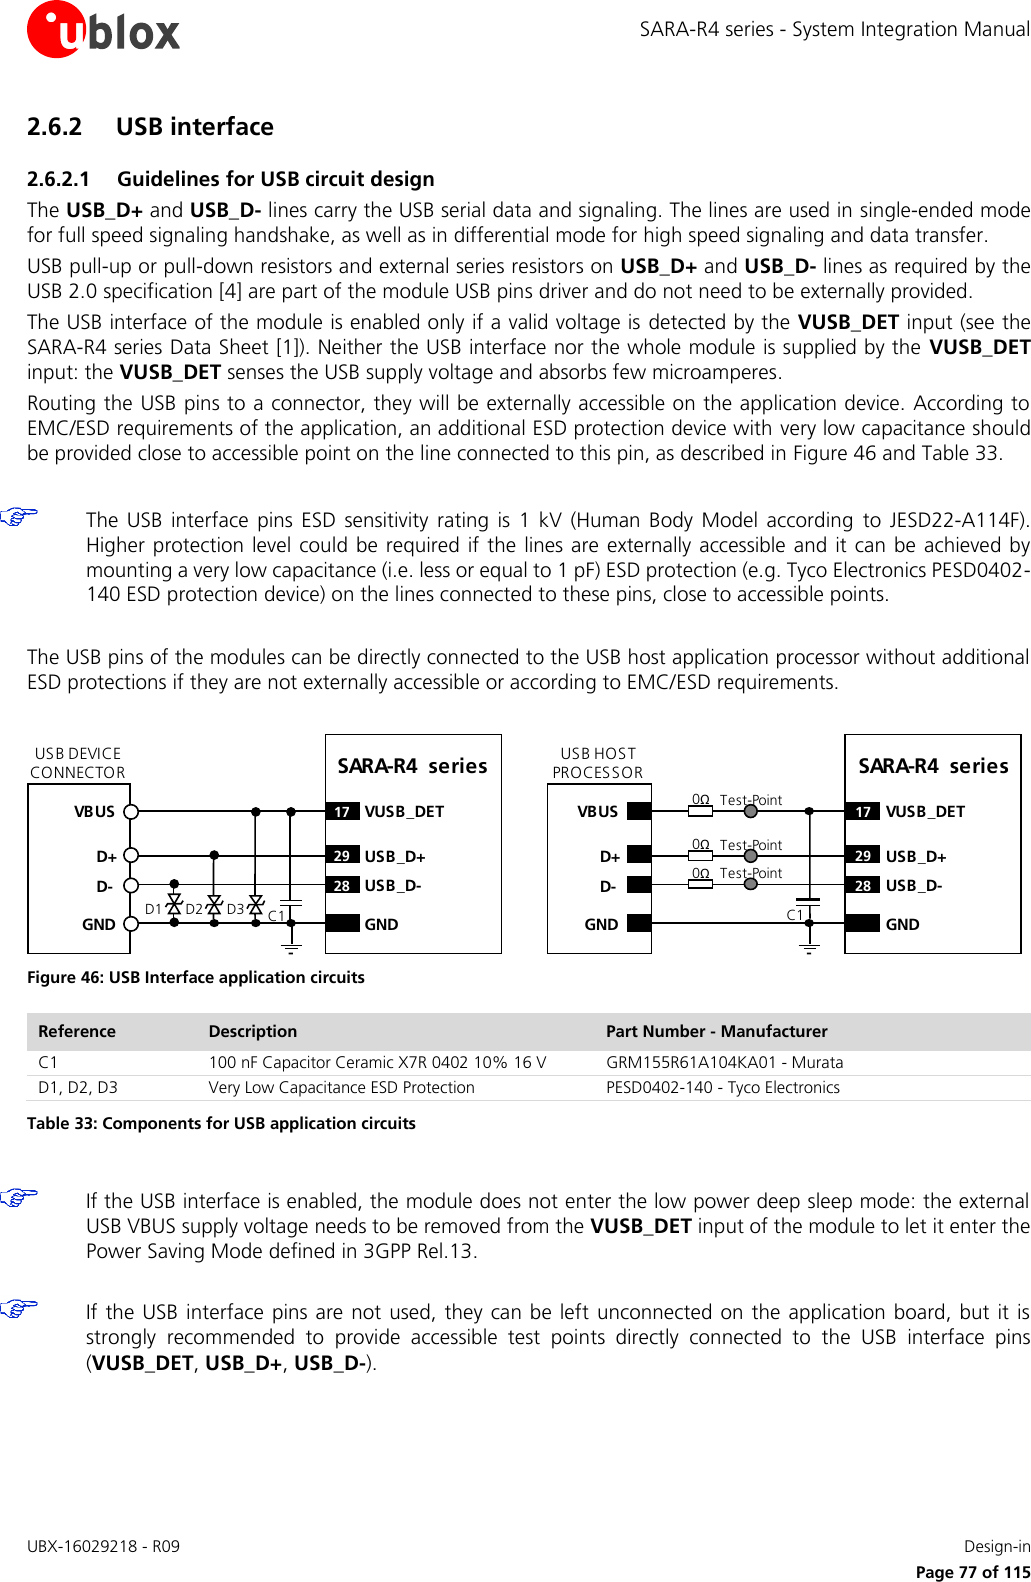 SARA-R4 series - System Integration Manual UBX-16029218 - R09    Design-in     Page 77 of 115 2.6.2 USB interface 2.6.2.1 Guidelines for USB circuit design The USB_D+ and USB_D- lines carry the USB serial data and signaling. The lines are used in single-ended mode for full speed signaling handshake, as well as in differential mode for high speed signaling and data transfer. USB pull-up or pull-down resistors and external series resistors on USB_D+ and USB_D- lines as required by the USB 2.0 specification [4] are part of the module USB pins driver and do not need to be externally provided. The USB interface of the module is enabled only if a valid voltage is  detected by the VUSB_DET input (see the SARA-R4 series Data Sheet [1]). Neither the USB interface nor the whole module is supplied by the  VUSB_DET input: the VUSB_DET senses the USB supply voltage and absorbs few microamperes. Routing the USB pins to a connector, they will be externally accessible on the application device. According to EMC/ESD requirements of the application, an additional ESD protection device with very low capacitance should be provided close to accessible point on the line connected to this pin, as described in Figure 46 and Table 33.   The  USB  interface  pins  ESD  sensitivity  rating is  1  kV  (Human  Body  Model  according  to  JESD22-A114F). Higher protection level could be required if the  lines are externally accessible and it can be  achieved by mounting a very low capacitance (i.e. less or equal to 1 pF) ESD protection (e.g. Tyco Electronics PESD0402-140 ESD protection device) on the lines connected to these pins, close to accessible points.  The USB pins of the modules can be directly connected to the USB host application processor without additional ESD protections if they are not externally accessible or according to EMC/ESD requirements.  D+D-GND29 USB_D+28 USB_D-GNDUSB DEVICE CONNECTORVBUSD+D-GND29 USB_D+28 USB_D-GNDUSB HOST PROCESSORSARA-R4  series  SARA-R4  series VBUS 17 VUSB_DET17 VUSB_DETD1 D2 D3 C1 C10ΩTest-Point0ΩTest-Point0ΩTest-Point Figure 46: USB Interface application circuits Reference Description Part Number - Manufacturer C1 100 nF Capacitor Ceramic X7R 0402 10% 16 V GRM155R61A104KA01 - Murata D1, D2, D3 Very Low Capacitance ESD Protection PESD0402-140 - Tyco Electronics  Table 33: Components for USB application circuits   If the USB interface is enabled, the module does not enter the low power deep sleep mode: the external USB VBUS supply voltage needs to be removed from the VUSB_DET input of the module to let it enter the Power Saving Mode defined in 3GPP Rel.13.   If the USB interface  pins are not used, they can be left unconnected on the application board, but it is strongly  recommended  to  provide  accessible  test  points  directly  connected  to  the  USB  interface  pins (VUSB_DET, USB_D+, USB_D-).  